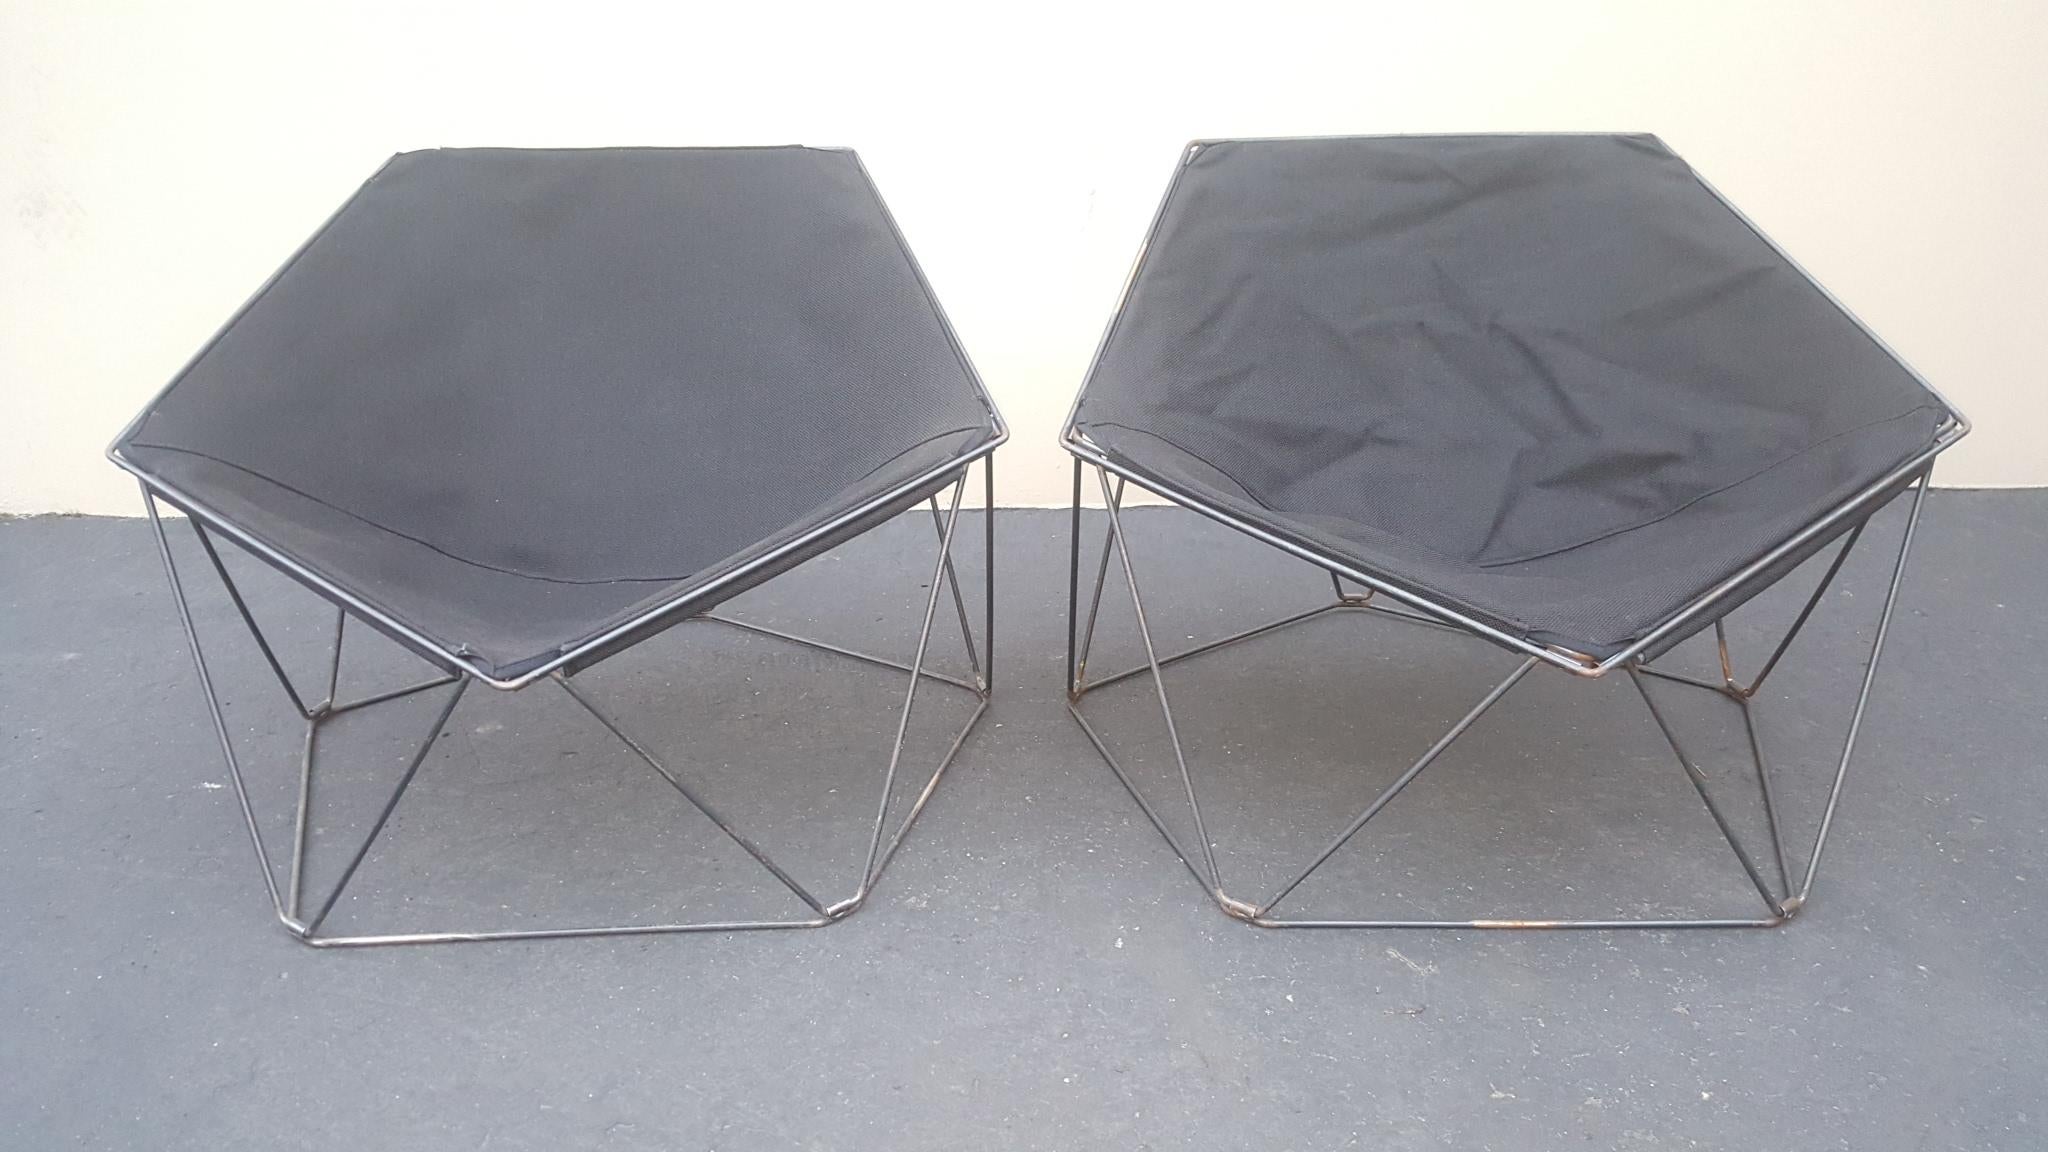 1960s French Mid-Century Modern penta lounge chairs designed by Jean-Paul Barray And Kim Moltzer for Wilhem Bofinger.

2 Penta lounge chairs, black canvas slings, pentagonal collapsible frames.

These sexy 1960s French Mid-Century Modern lounge